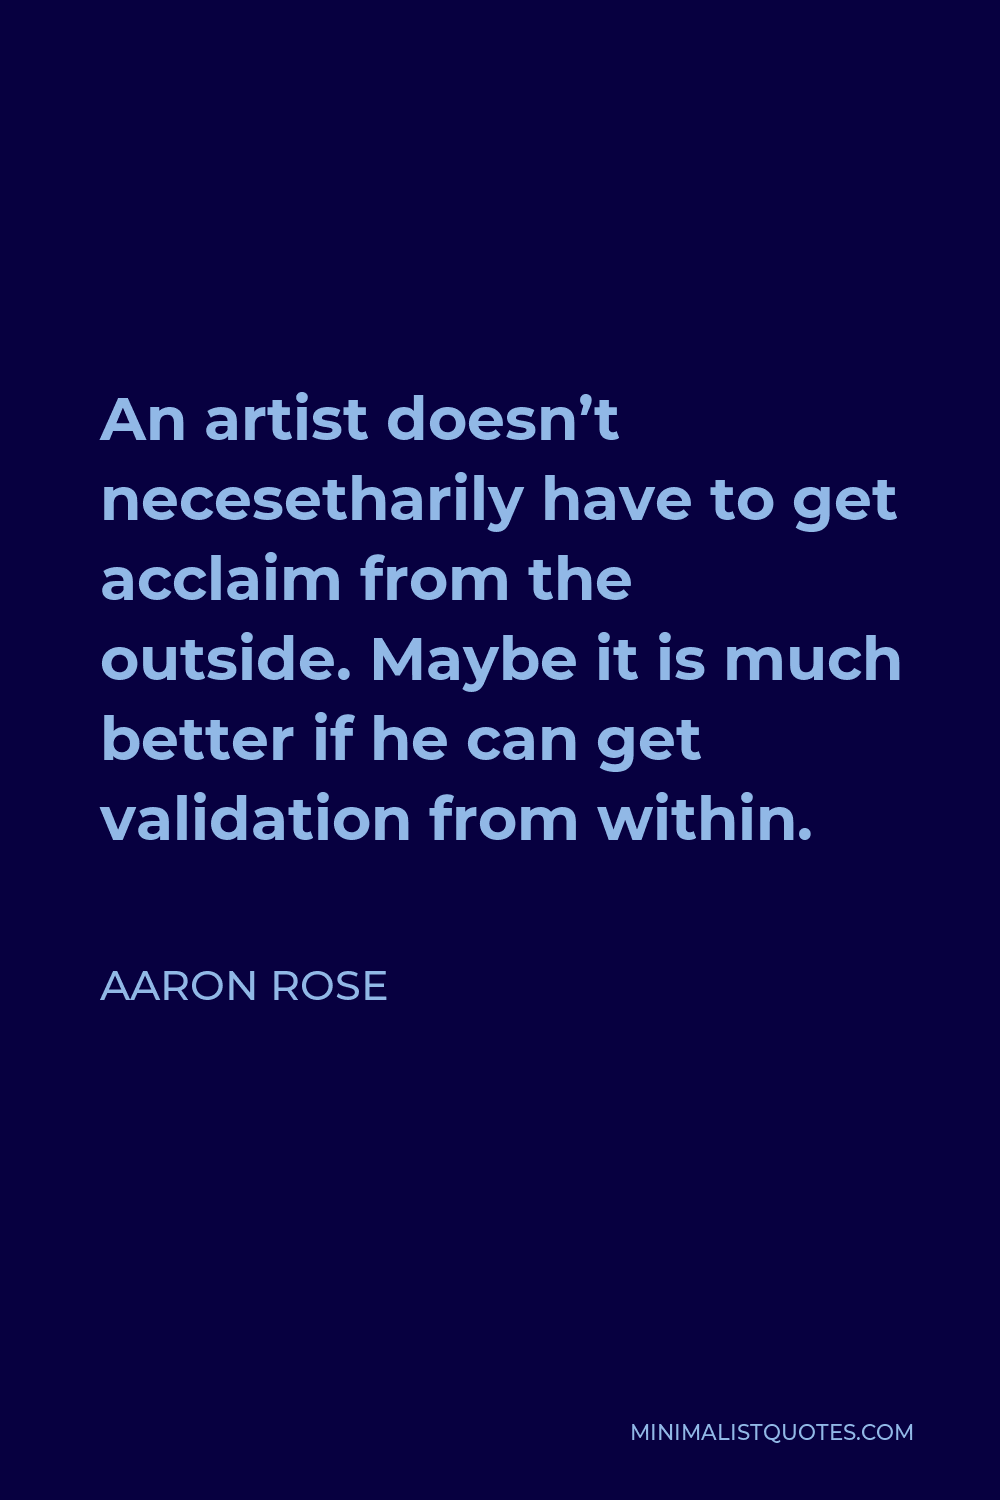 Aaron Rose Quote - An artist doesn’t necesetharily have to get acclaim from the outside. Maybe it is much better if he can get validation from within.